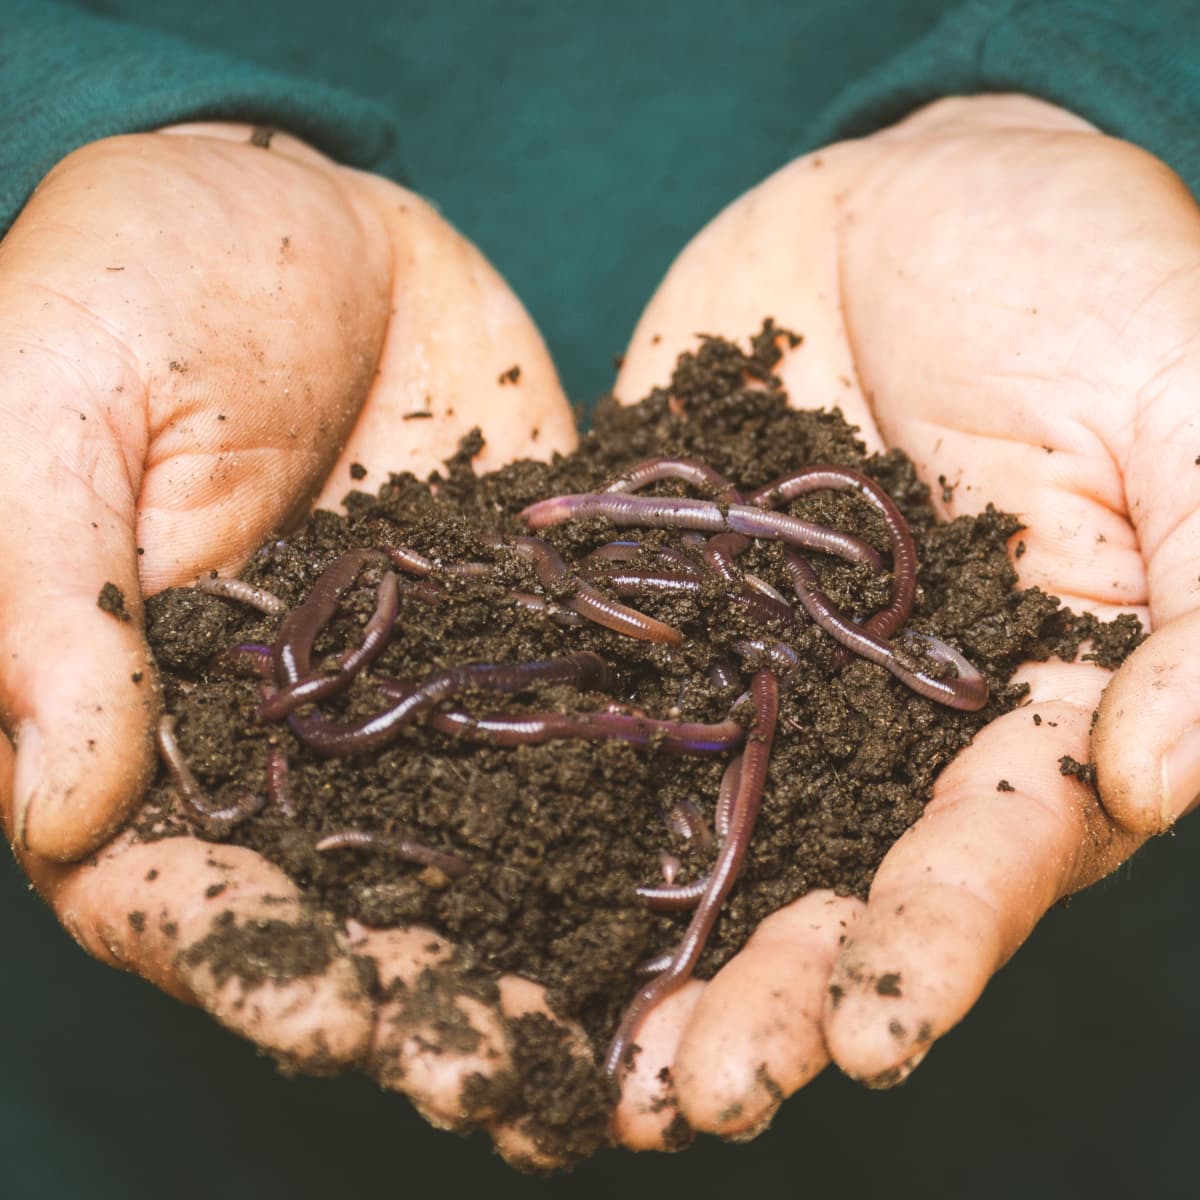 You Can Compost Meat in a Worm Bin - Dengarden